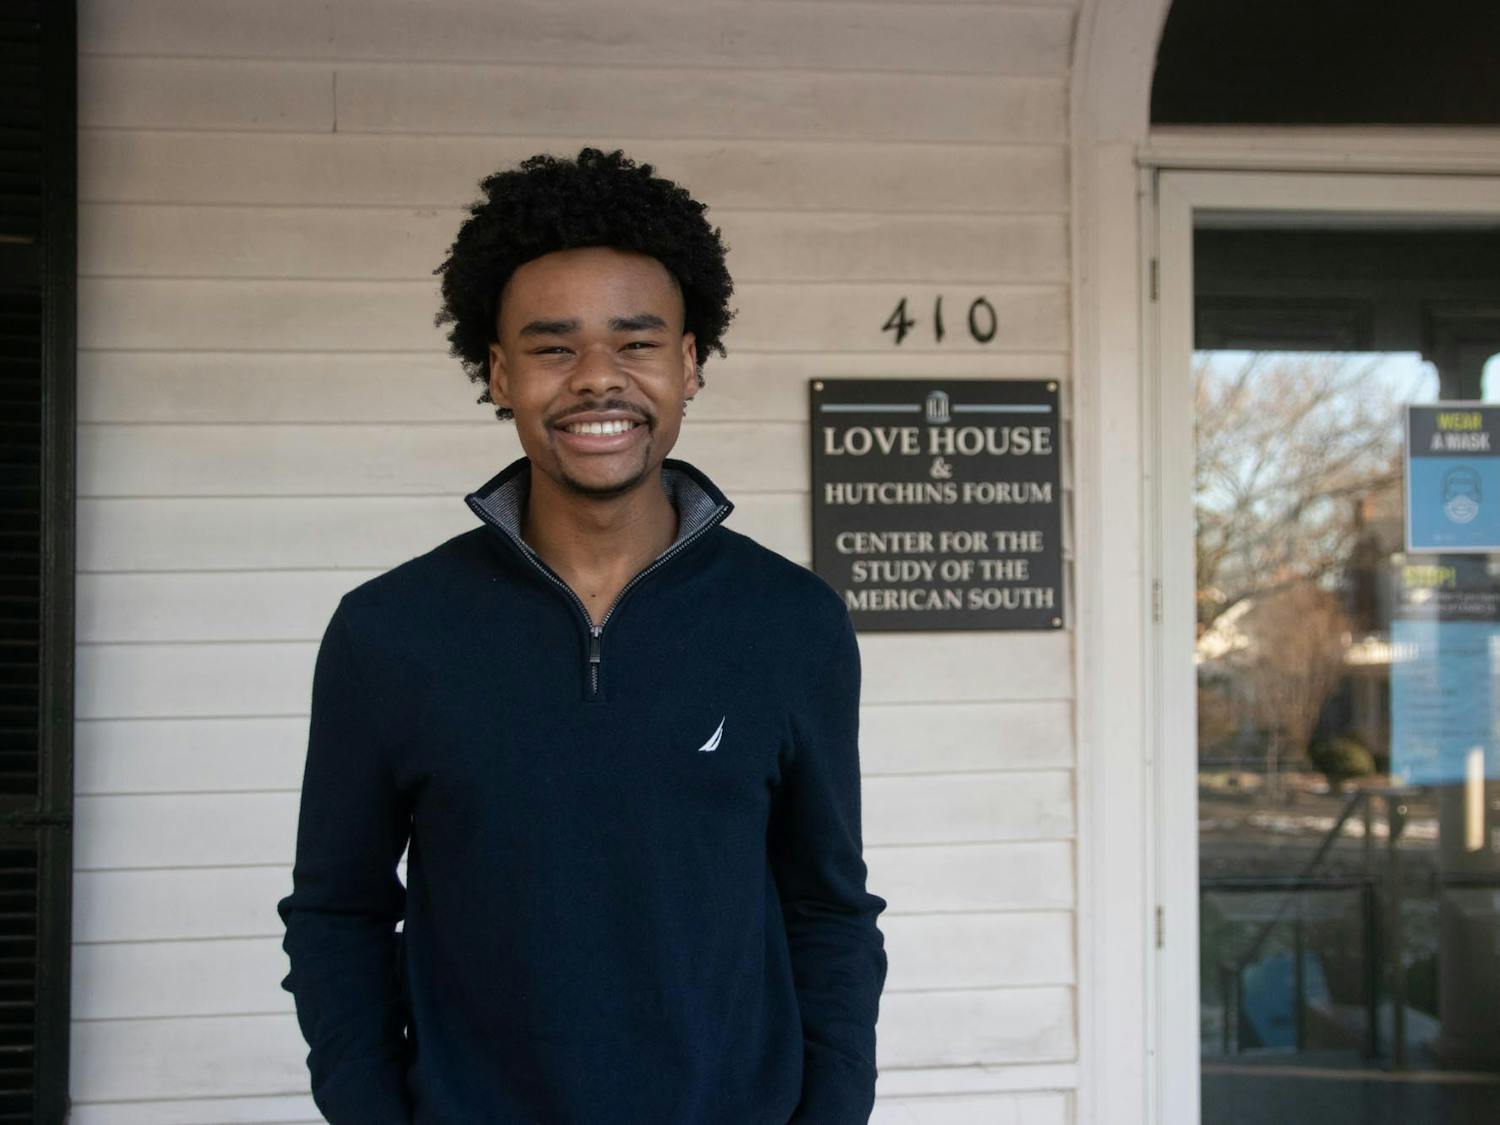 UNC sophomore Shamar Wilson poses for a portrait on Tuesday, Jan. 18, 2022, outside The Love House and Hutchins Forum in Chapel Hill. Wilson is an intern for The Southern Oral History Program, a program dedicated to collecting interviews from Southerners for archival purposes.